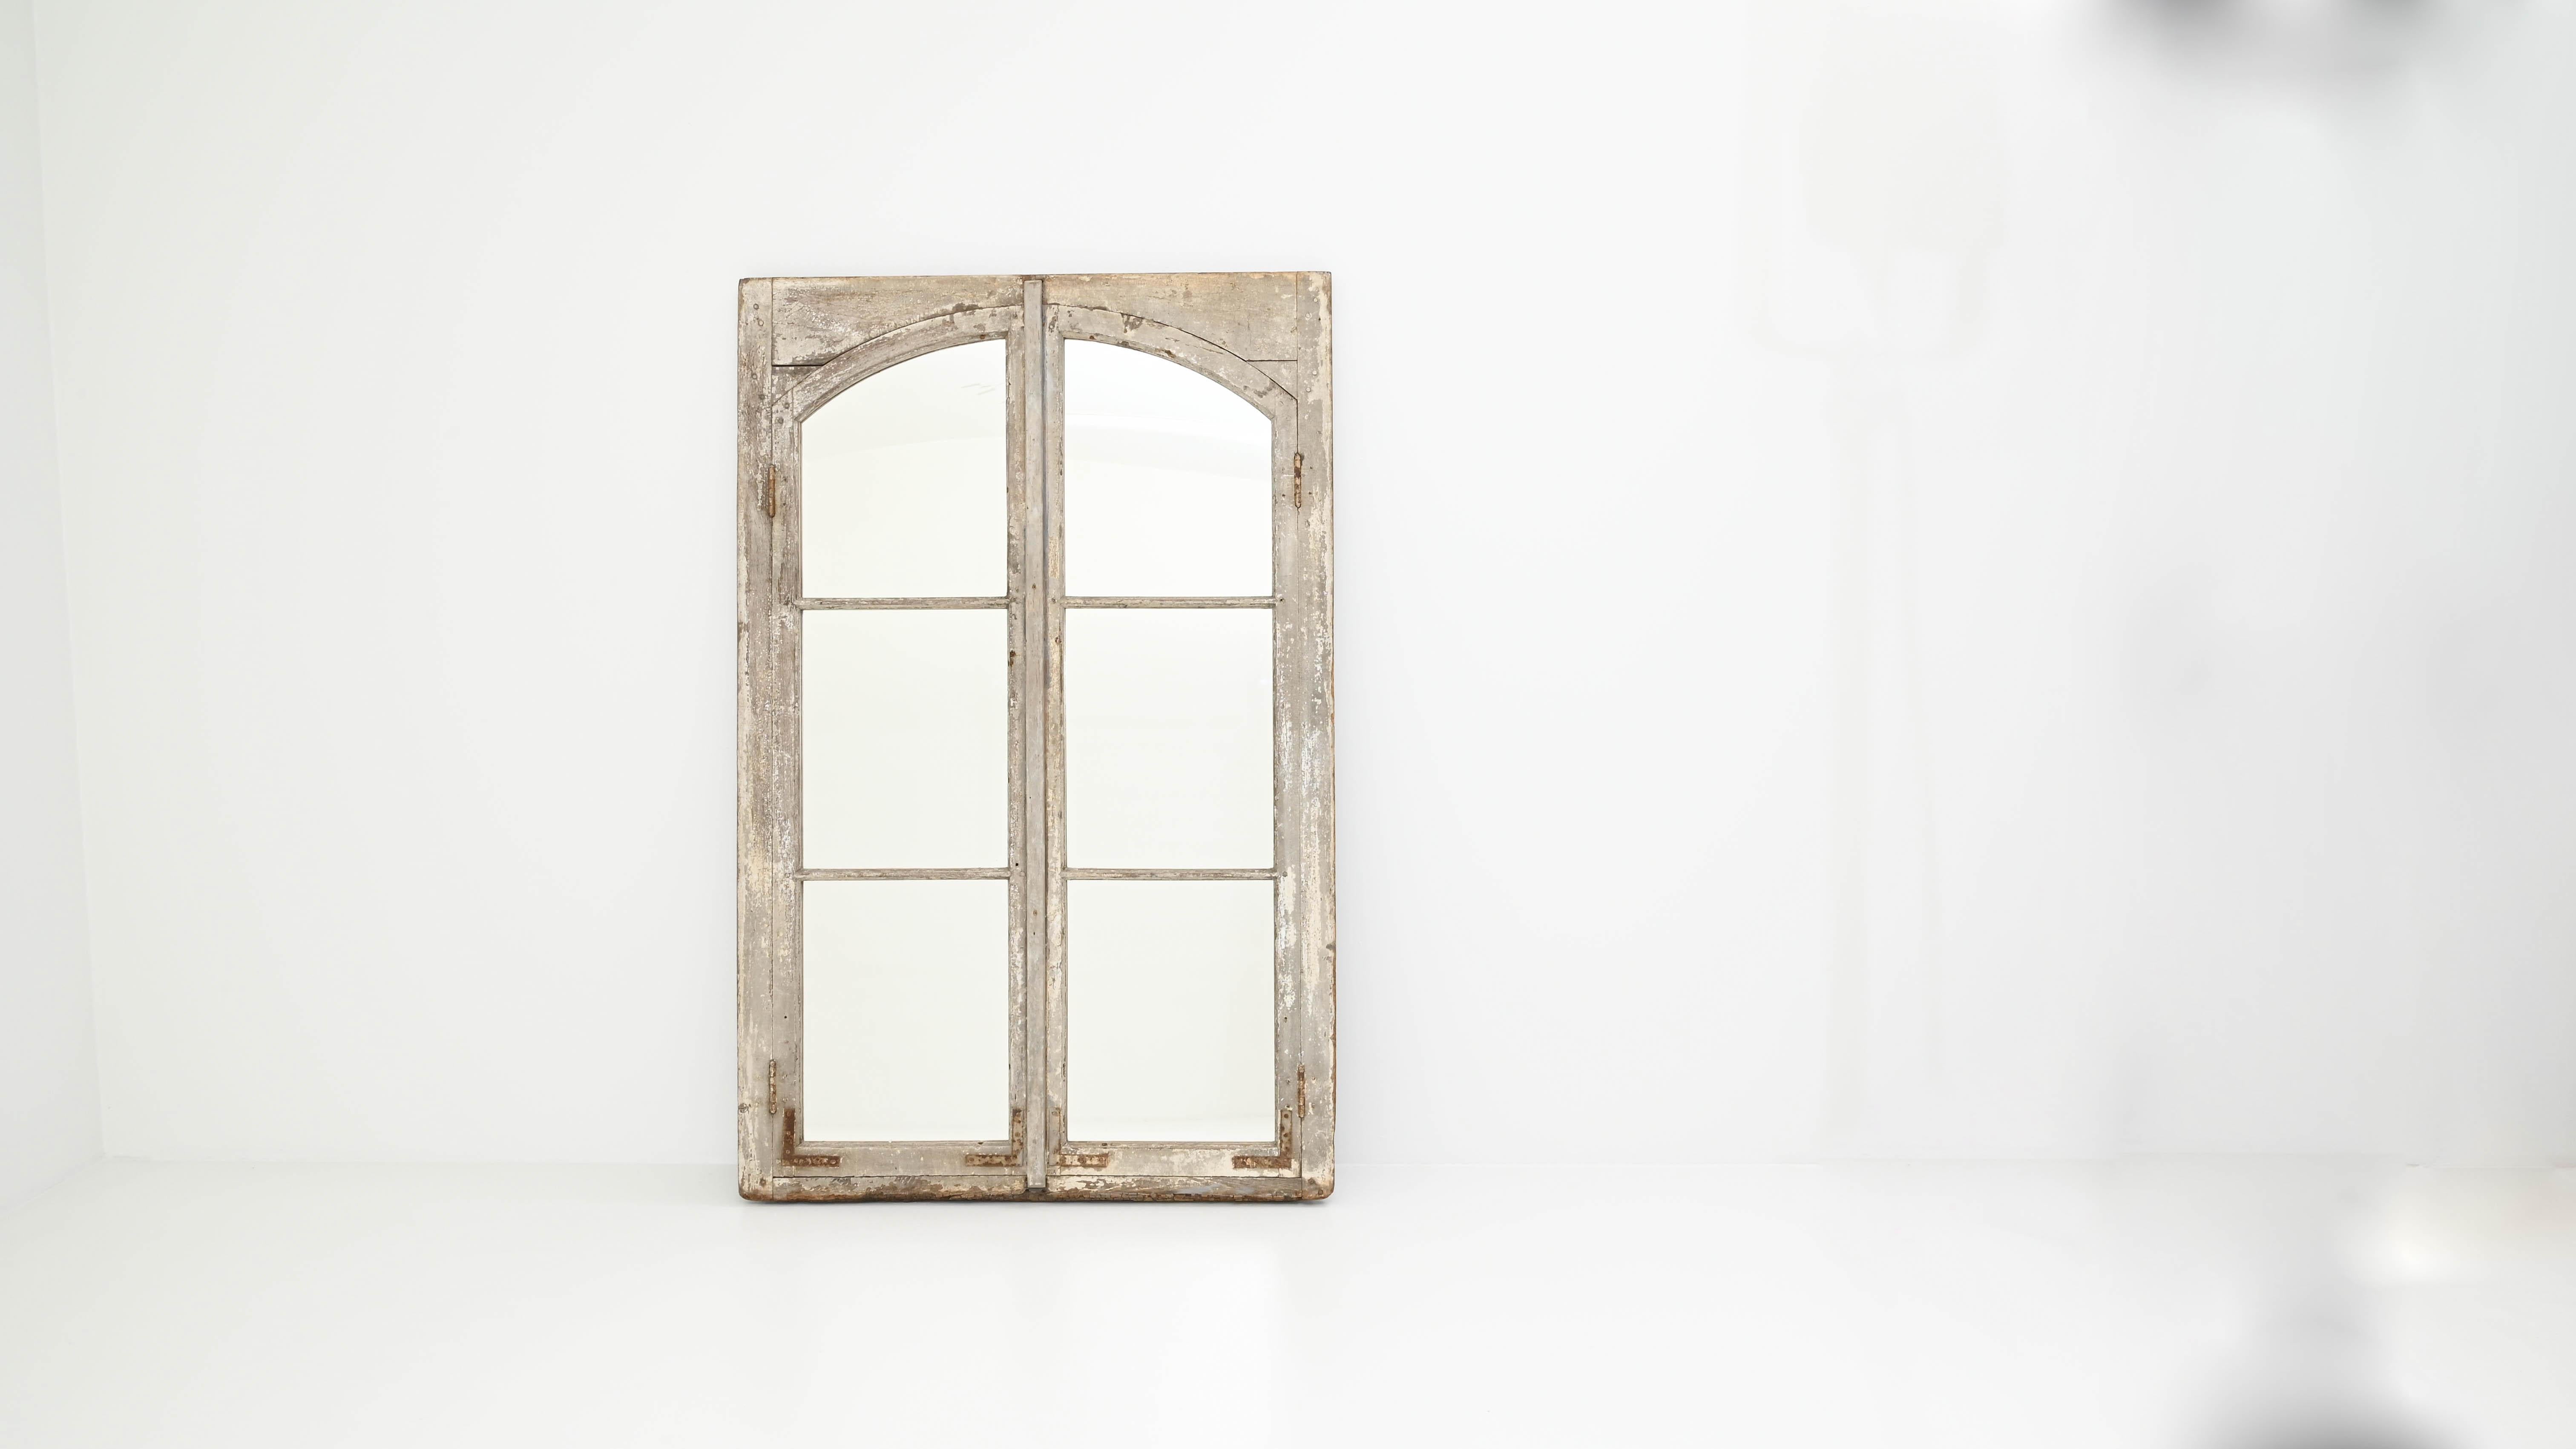 Elegant and evocative, this antique window mirror makes a unique accent for a garden or interior. Made in France in the 1800s, the mullioned wooden frame evokes the tall windows of French chateaus and country houses. The original white-painted